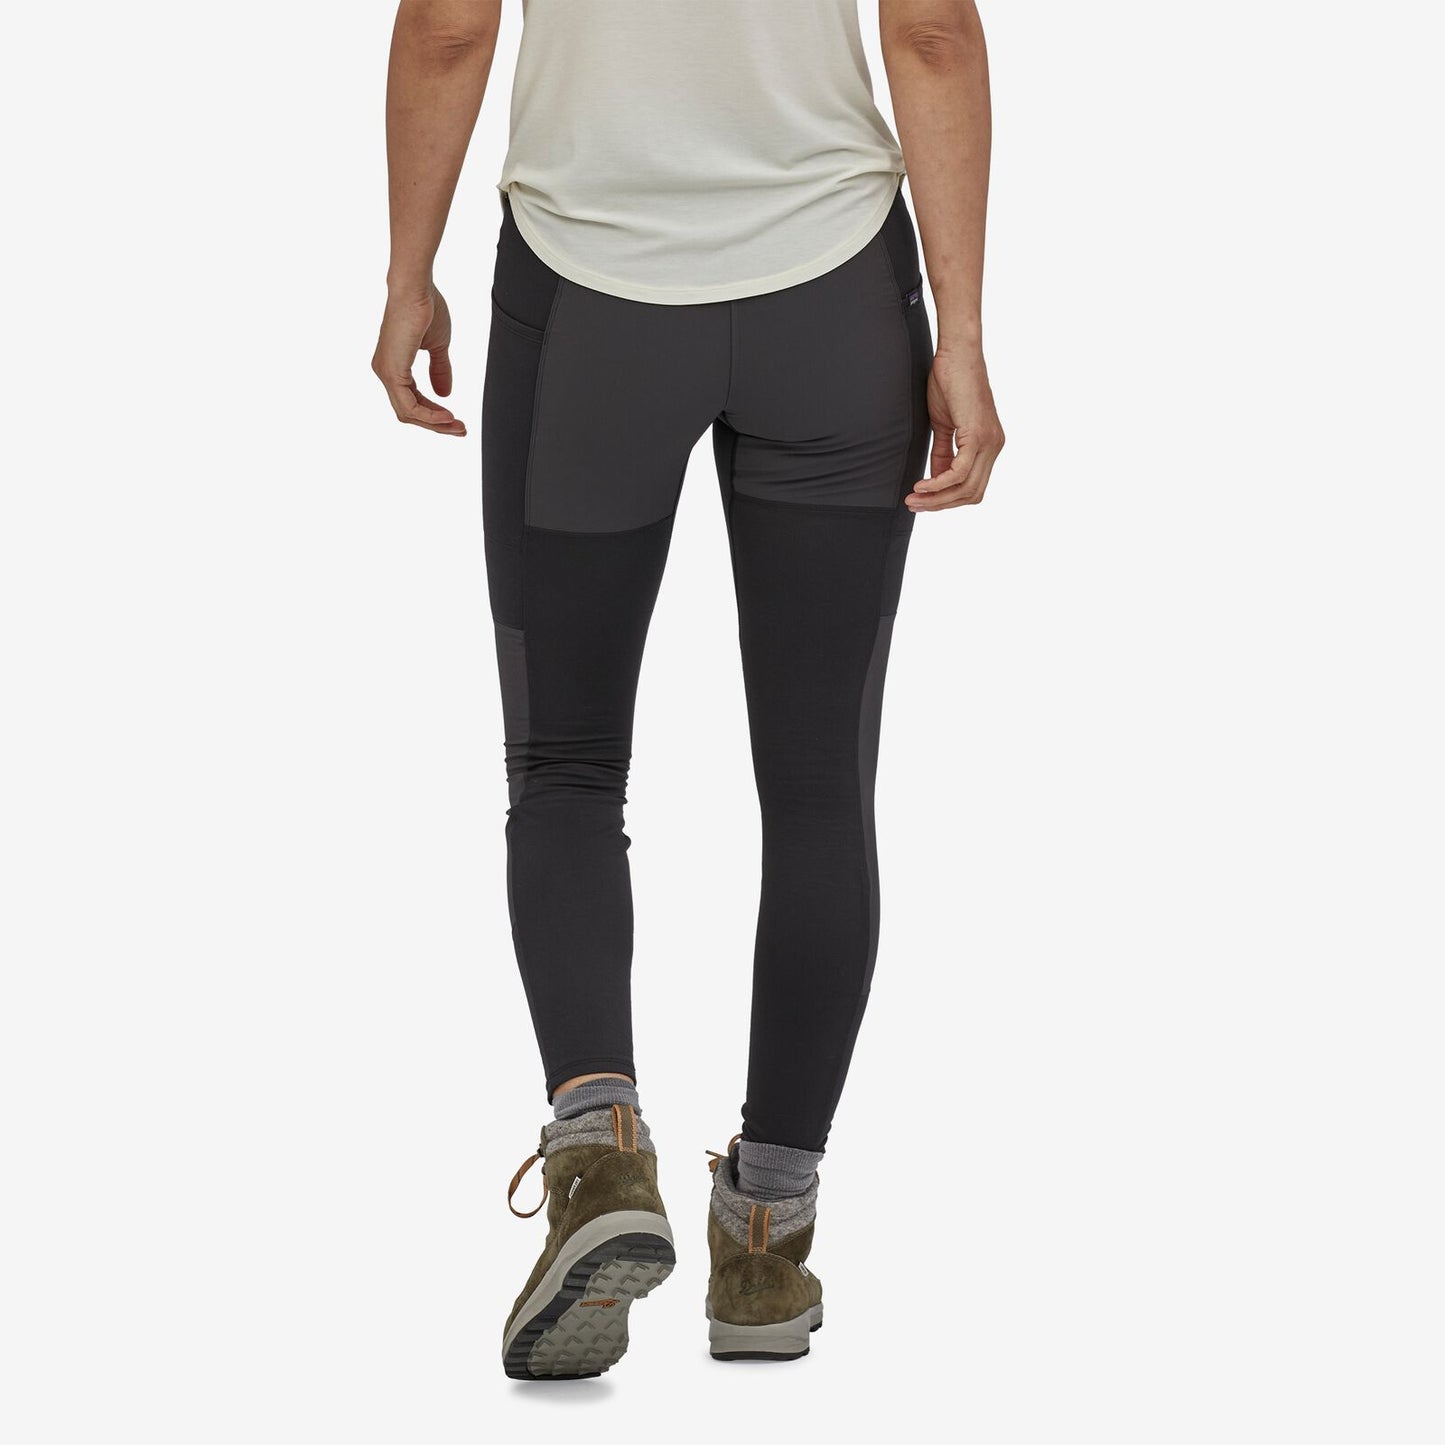 Women's Pack Out Hike Tights (Size - S/10UK)